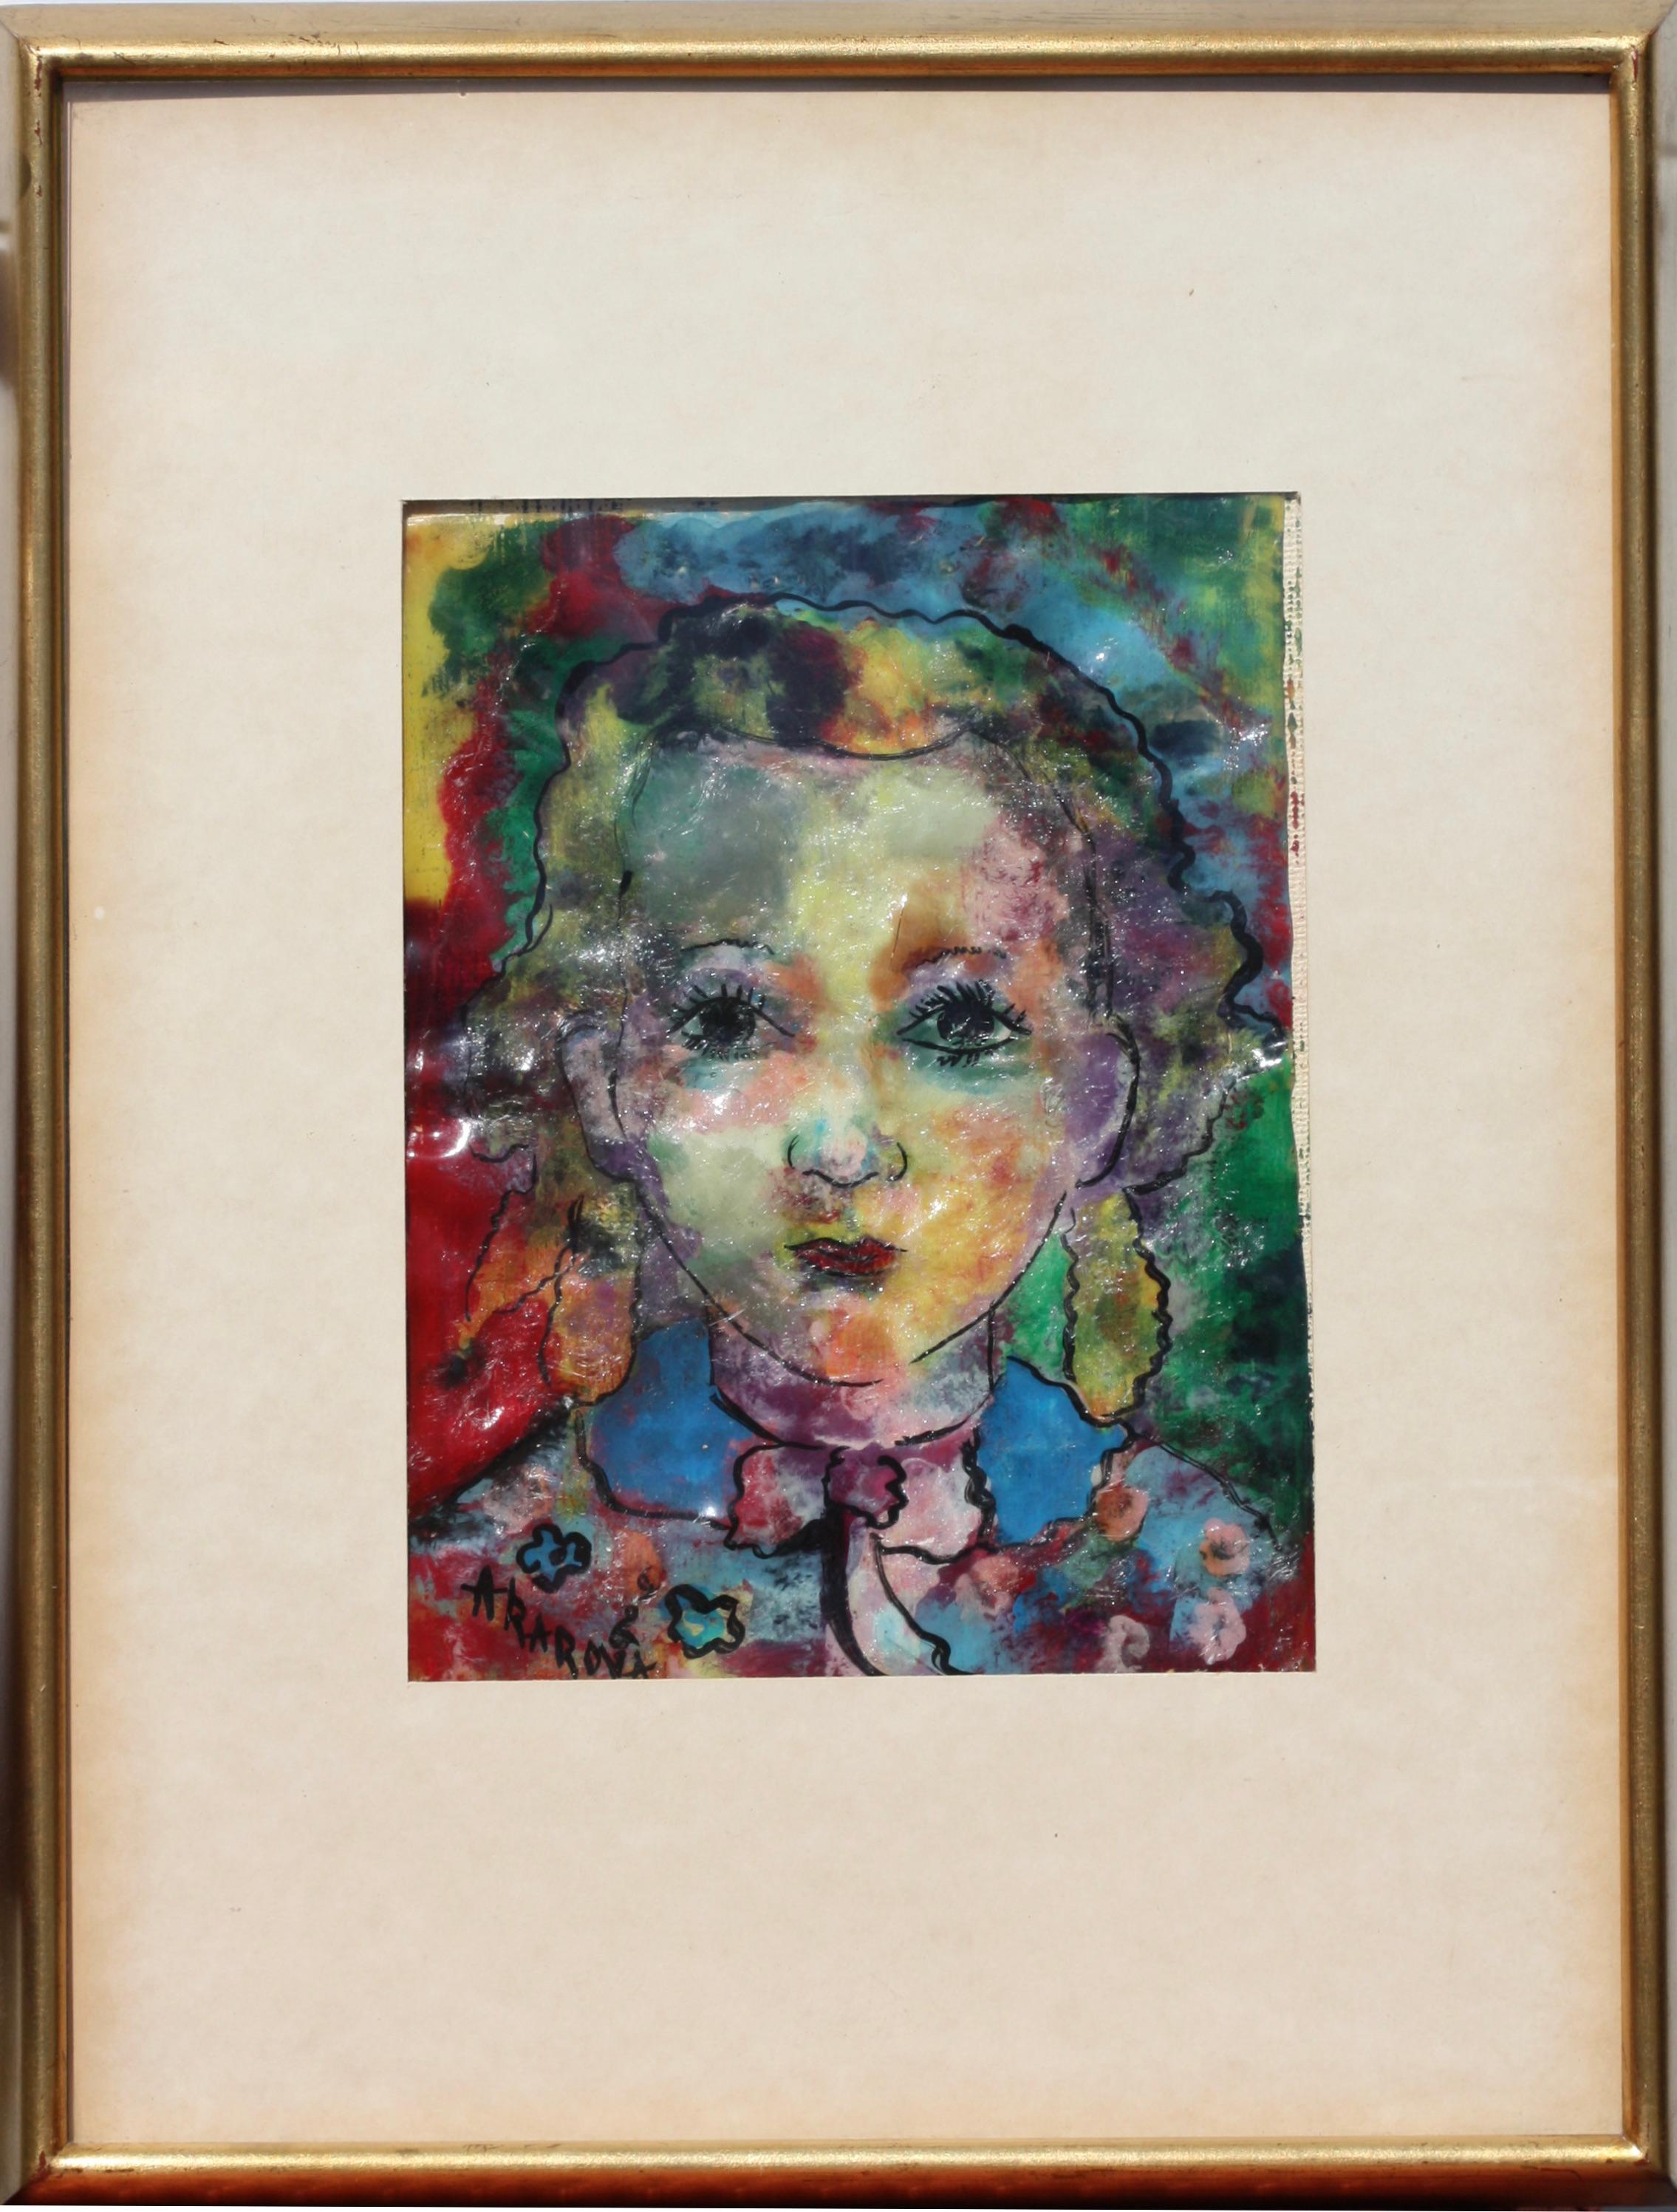 Marguerite Acarin AKAROVA (1904-1999)
watercolor on paper
signed lower left
AKAROVA
Sight size:
6.7 in. (17 cm.) x 8.85 in. (22.5 cm.)
Size with frame
15.74 in. (40 cm.) x 12.2 in. (31 cm).